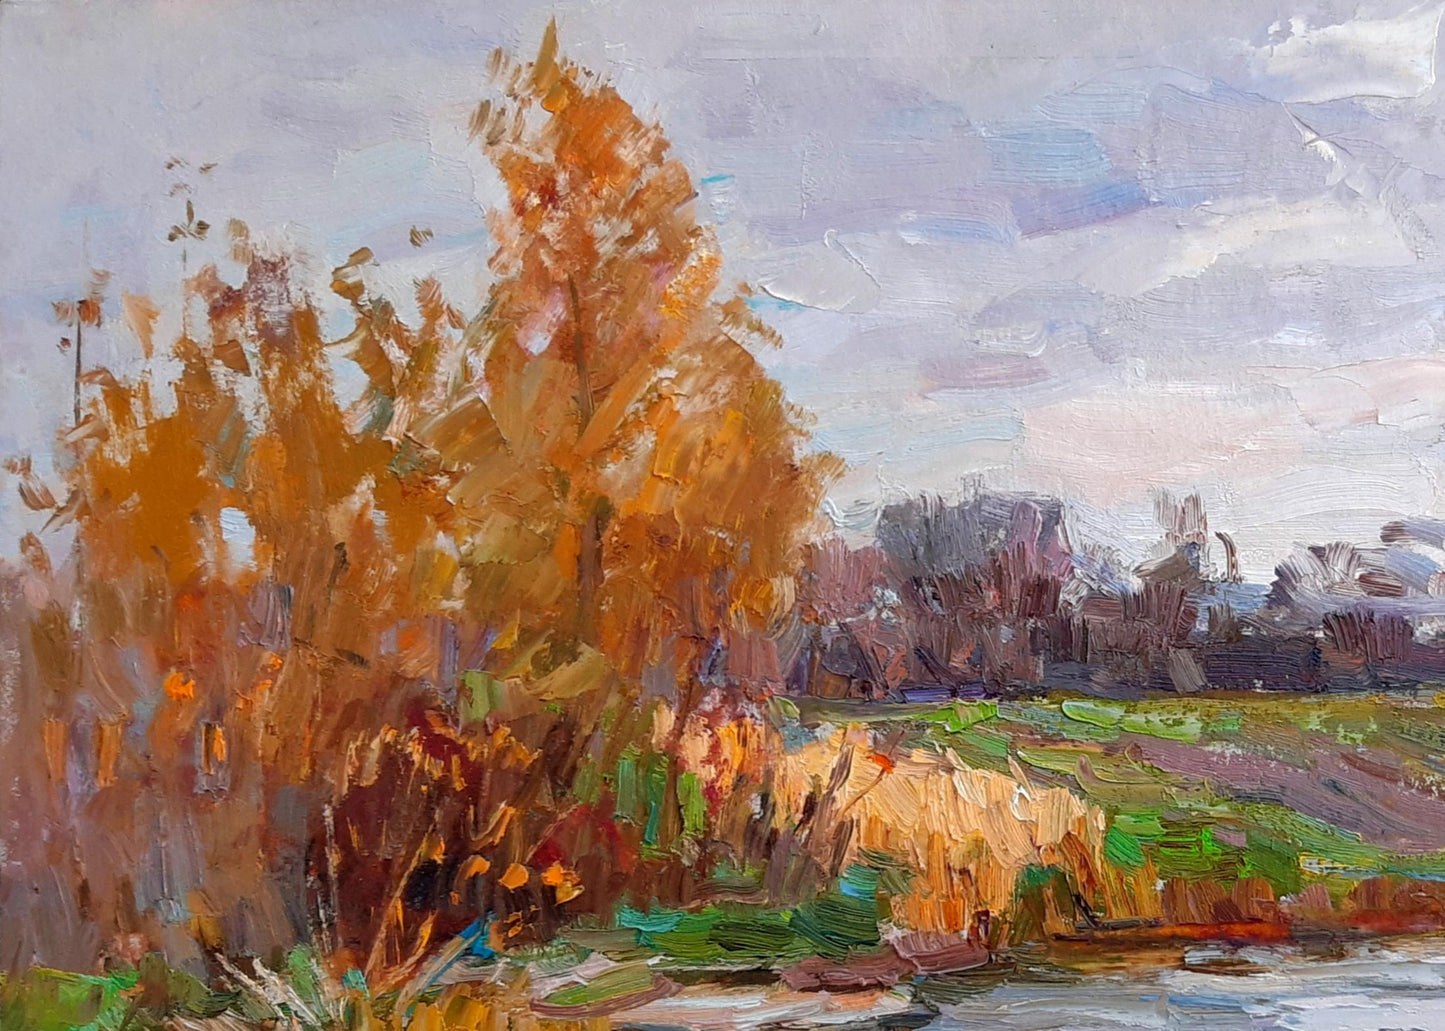 Vyacheslav Pereta's oil painting titled "October Morning"